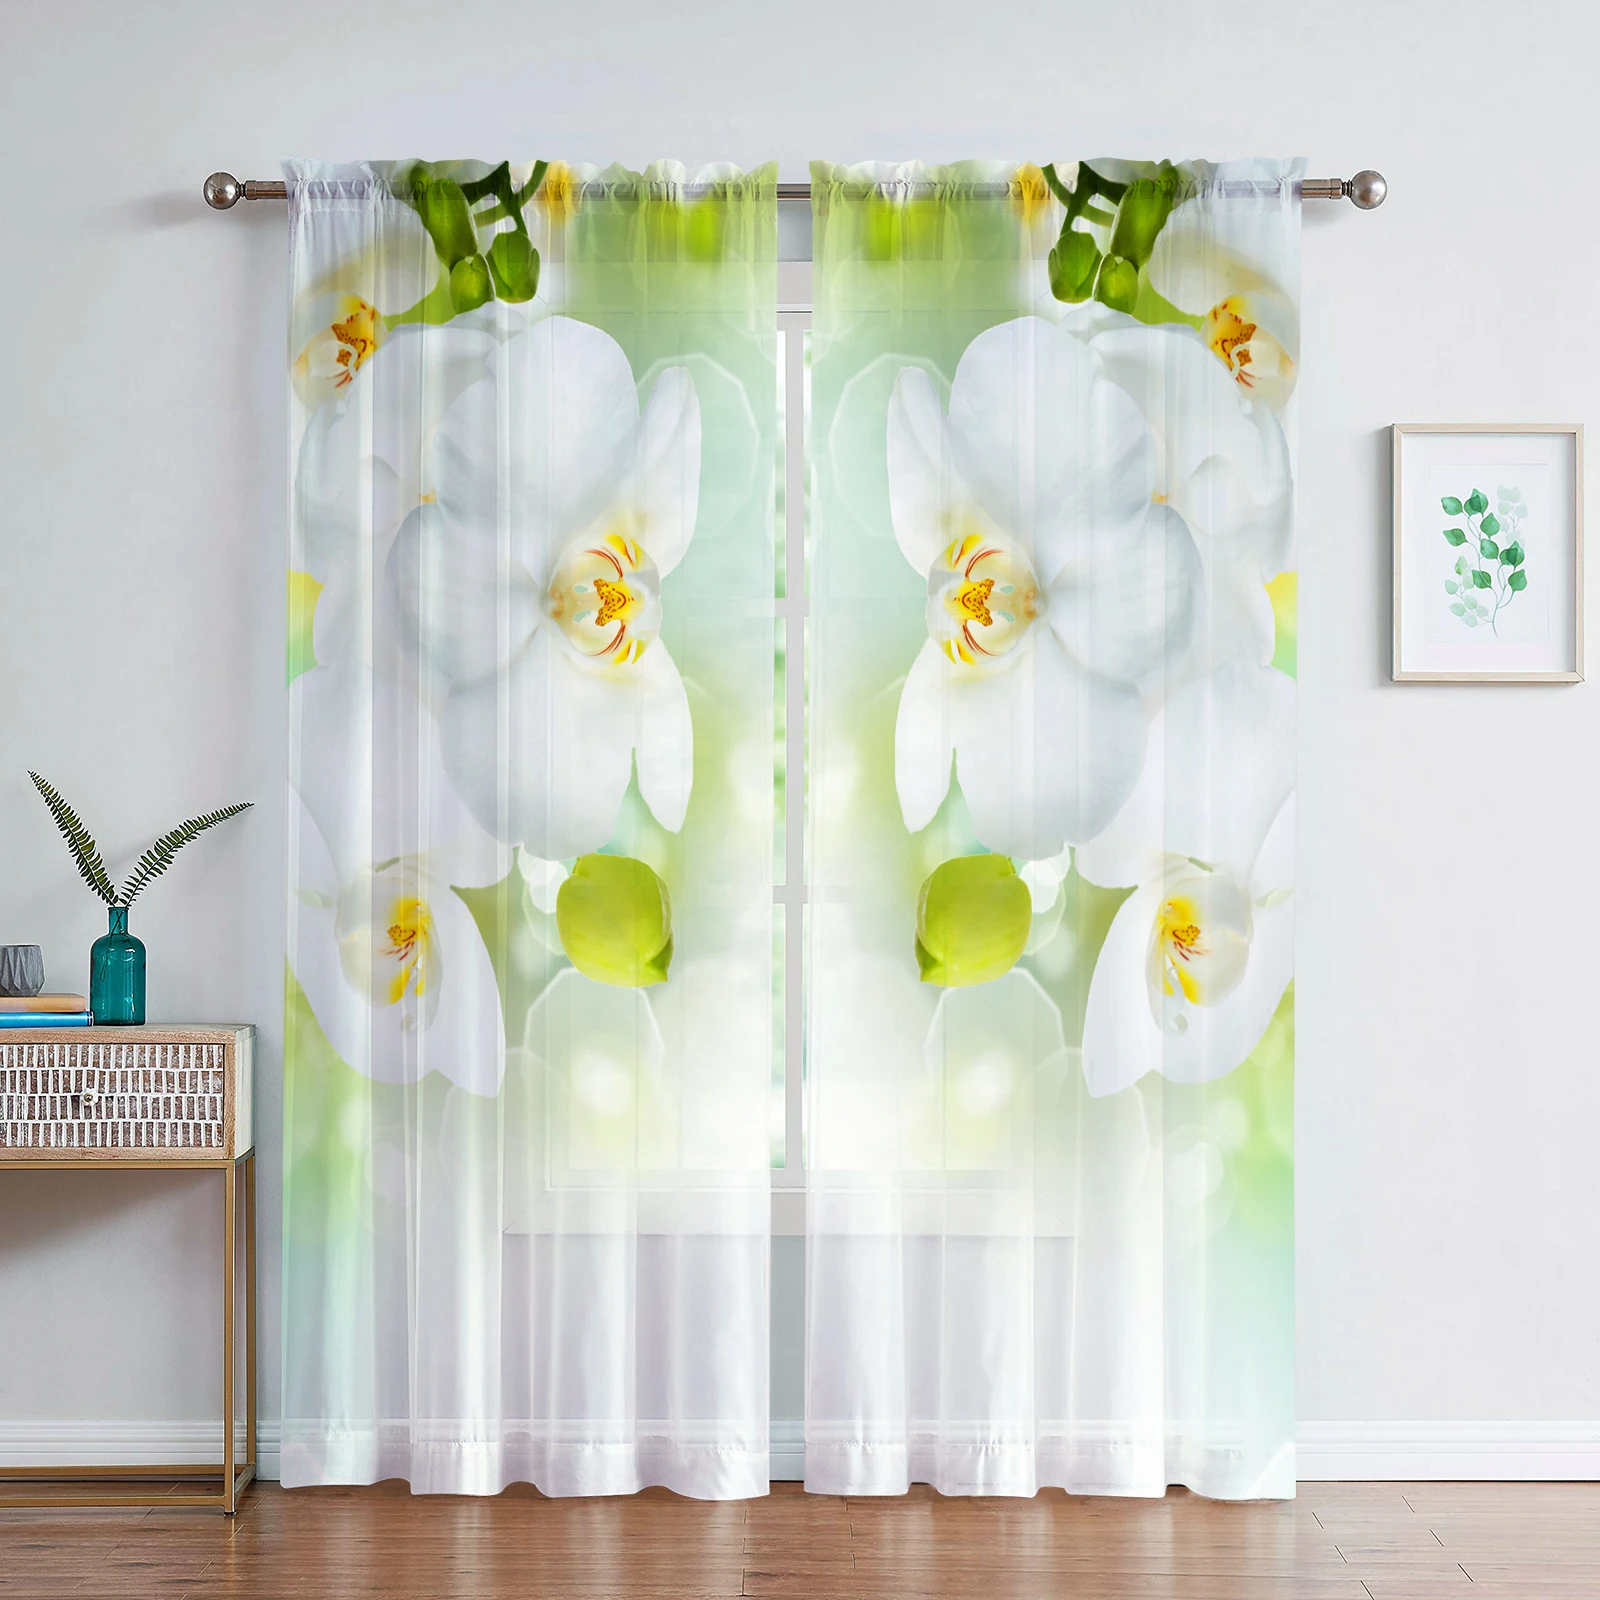 

Phalaenopsis Floral Sheer Voile Curtain For Living Dining Room Bedroom Kitchen Window Transparent Chiffon Flowers Tulle Curtains